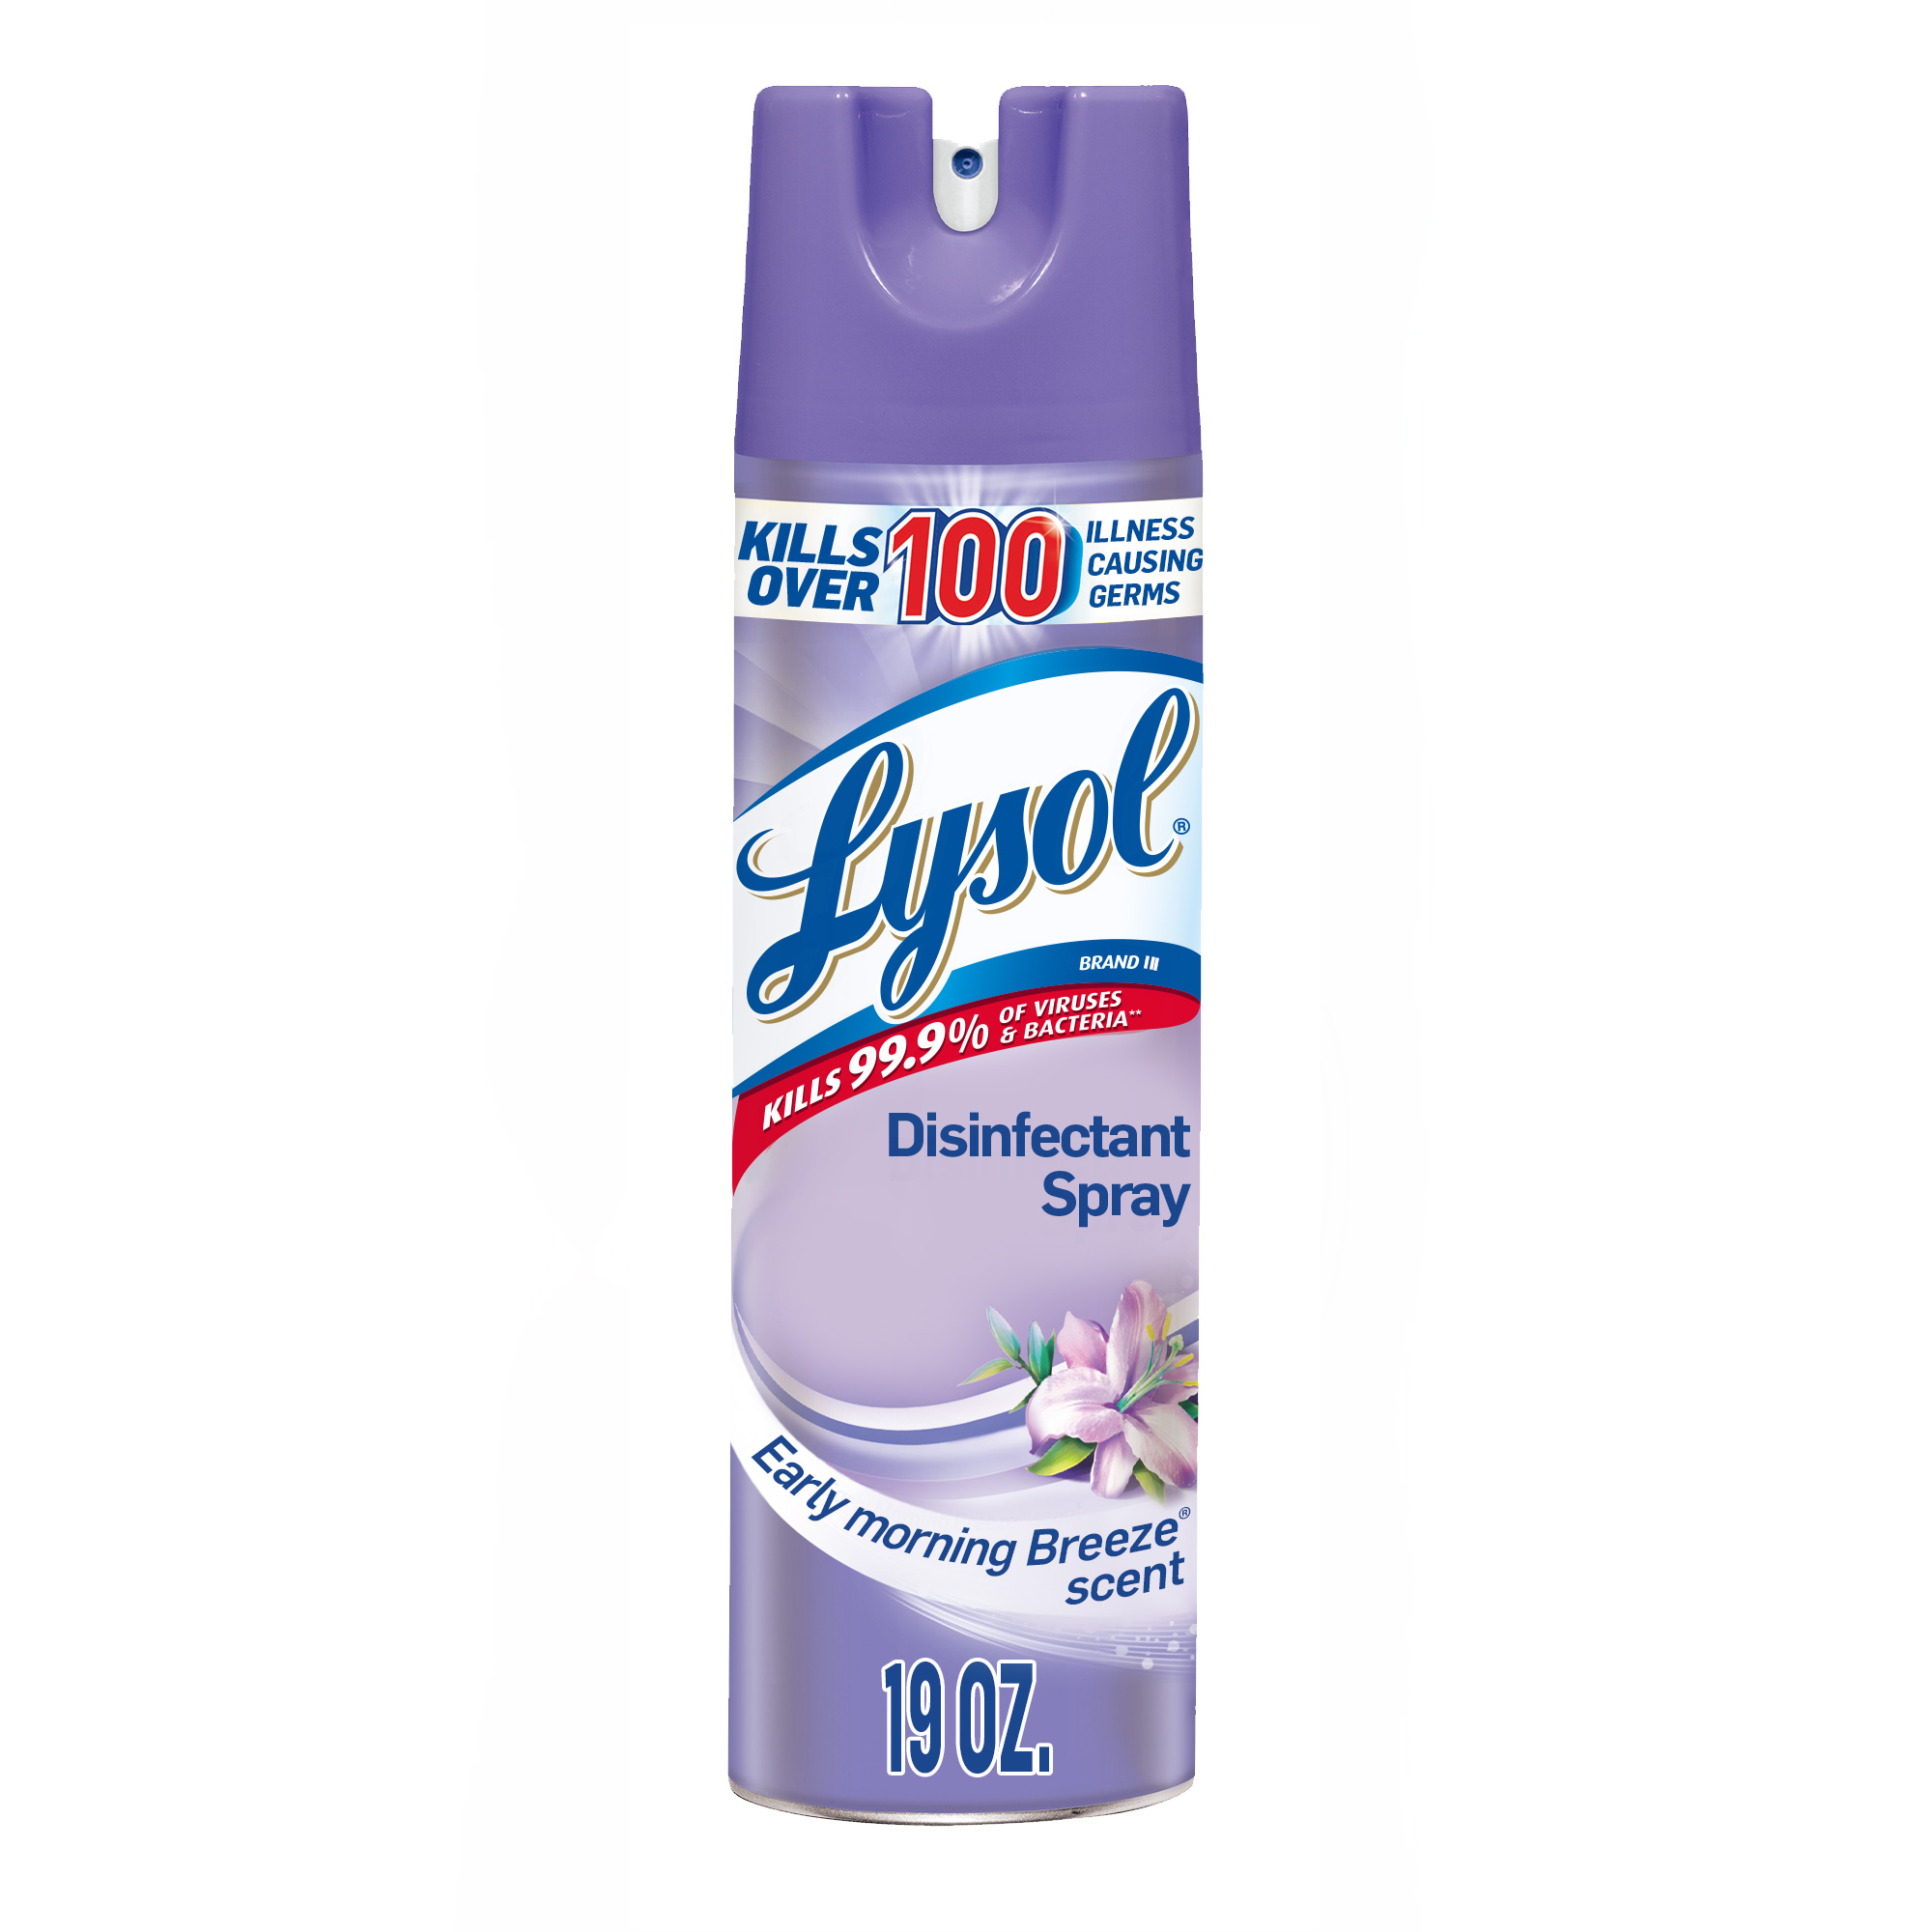 Lysol Disinfectant Spray, Sanitizing and Antibacterial Spray, For Disinfecting and Deodorizing, Early Morning Breeze, 19 Fl Oz - image 1 of 7